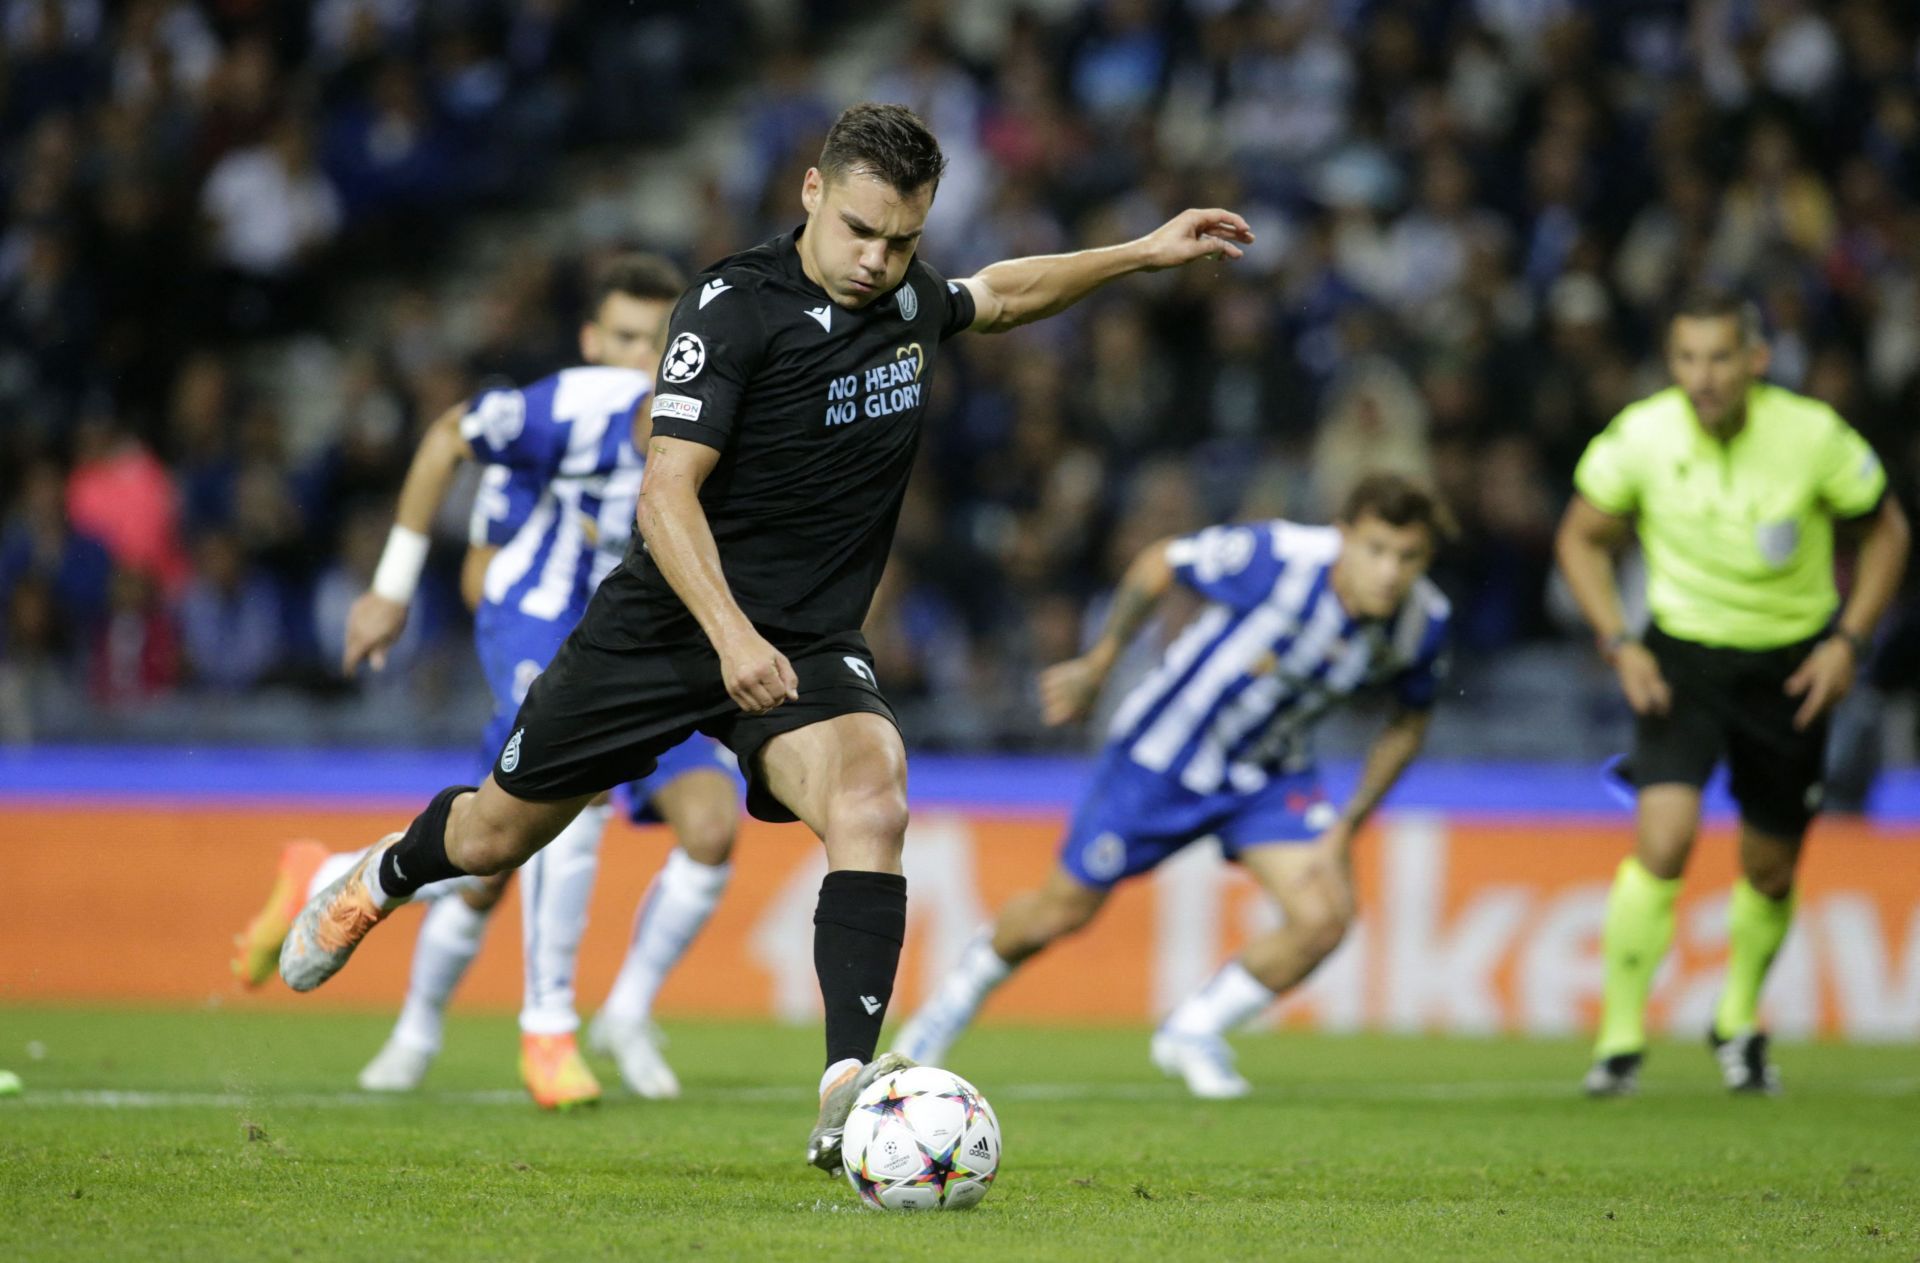 Club Brugge take on Porto in the Champions League on Wednesday